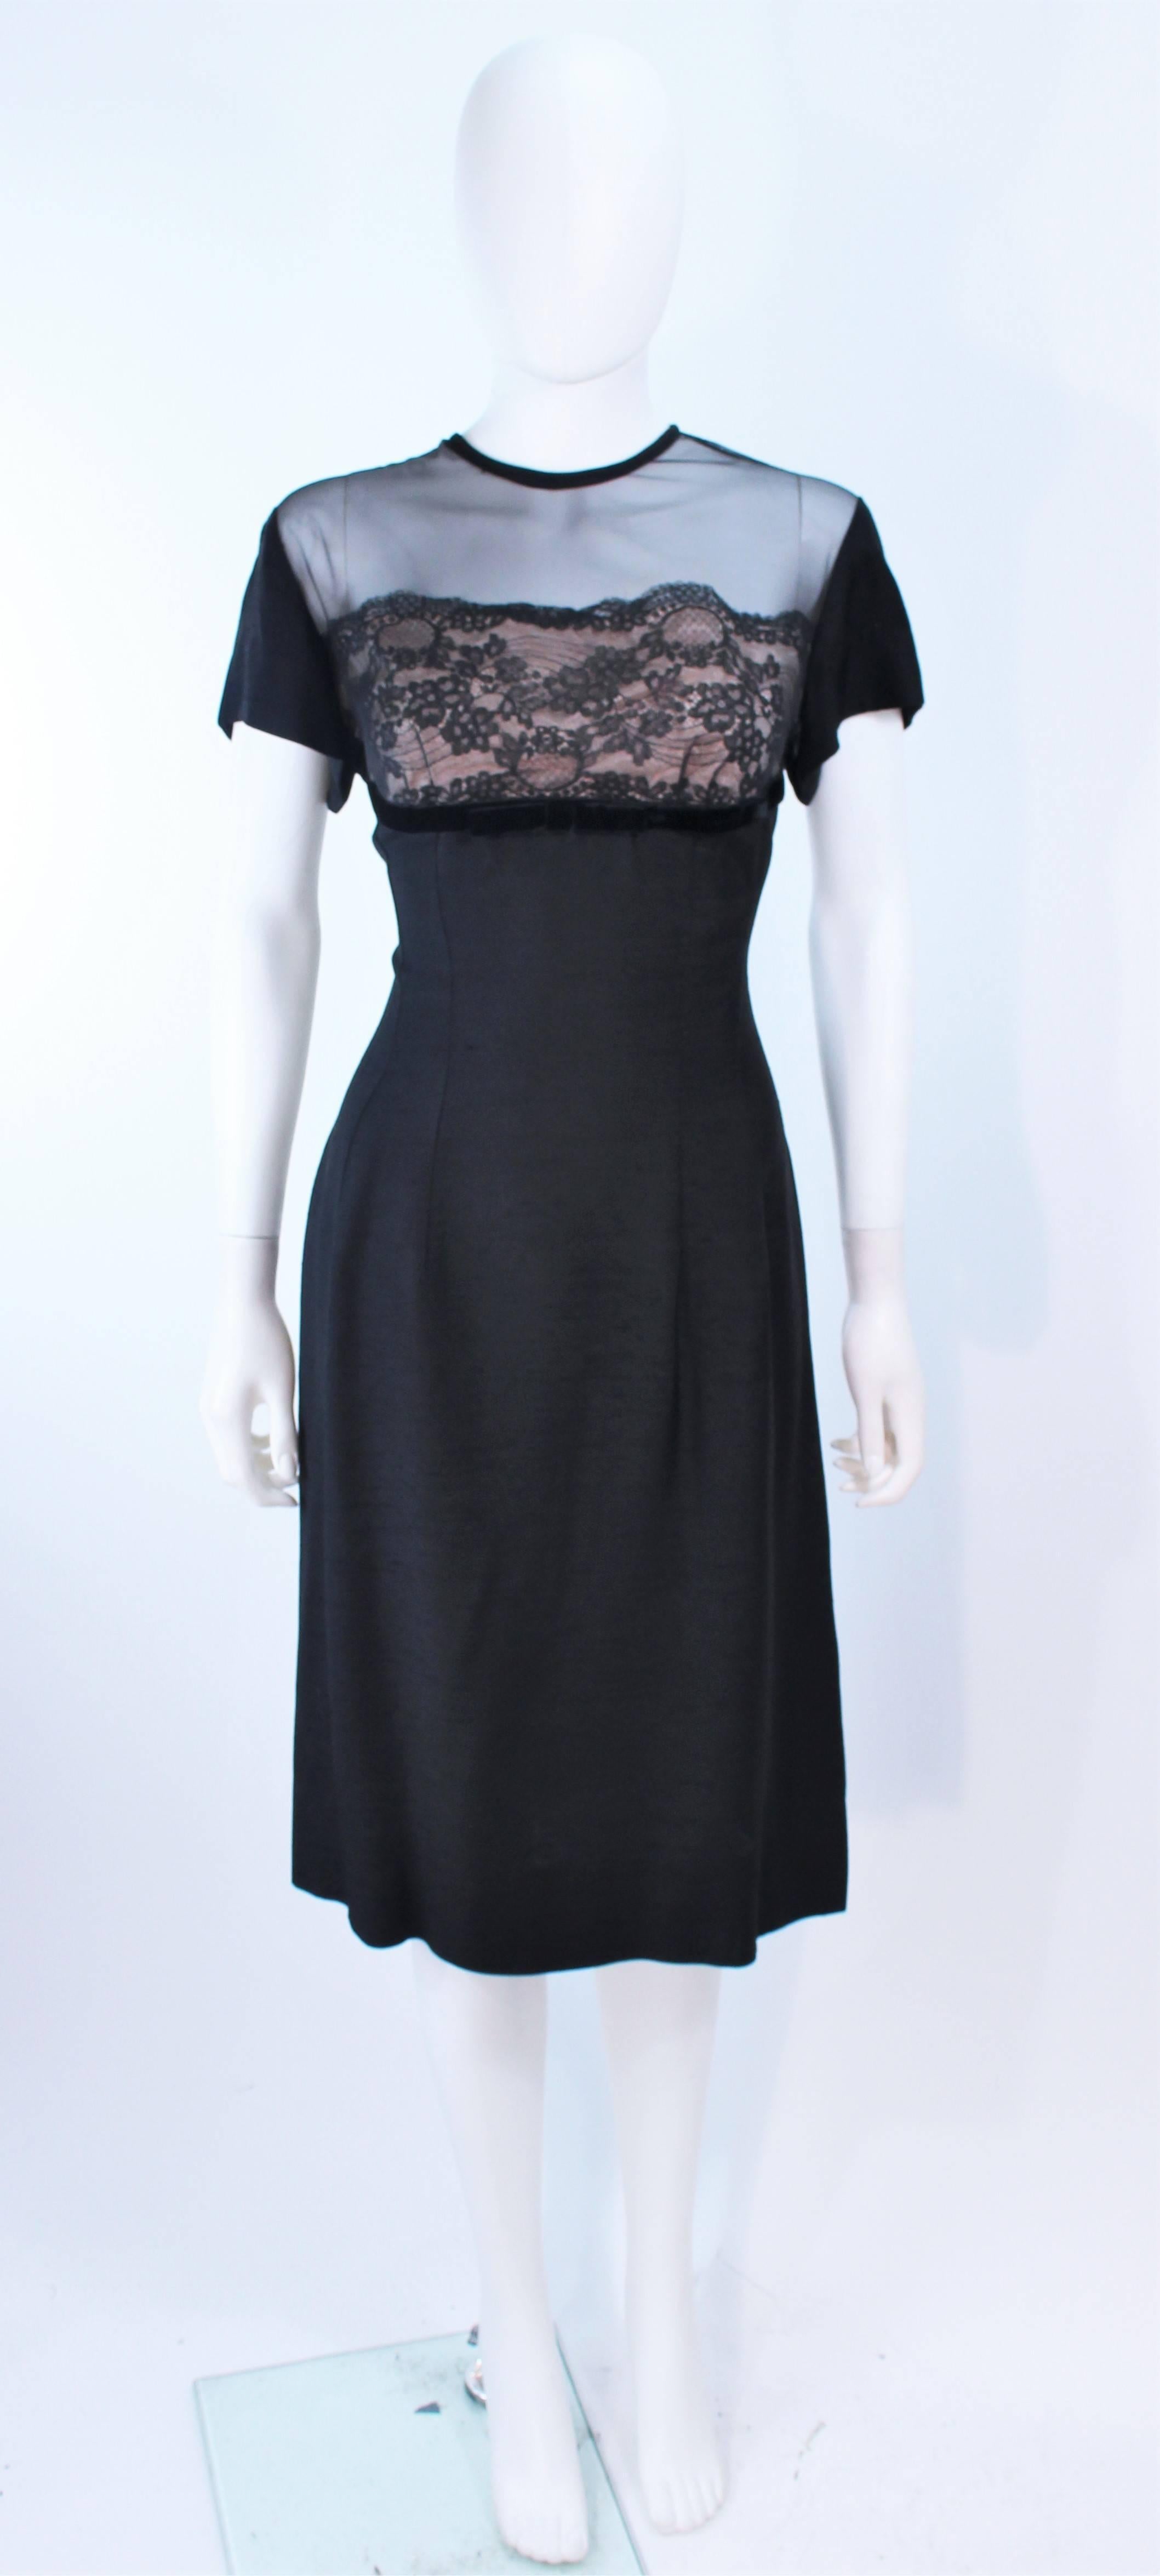 This J. Harlan design is composed of a black silk with a mesh bust detail and lace accents. There is a center back zipper closure. In excellent vintage condition.

**Please cross-reference measurements for personal accuracy. Size in description